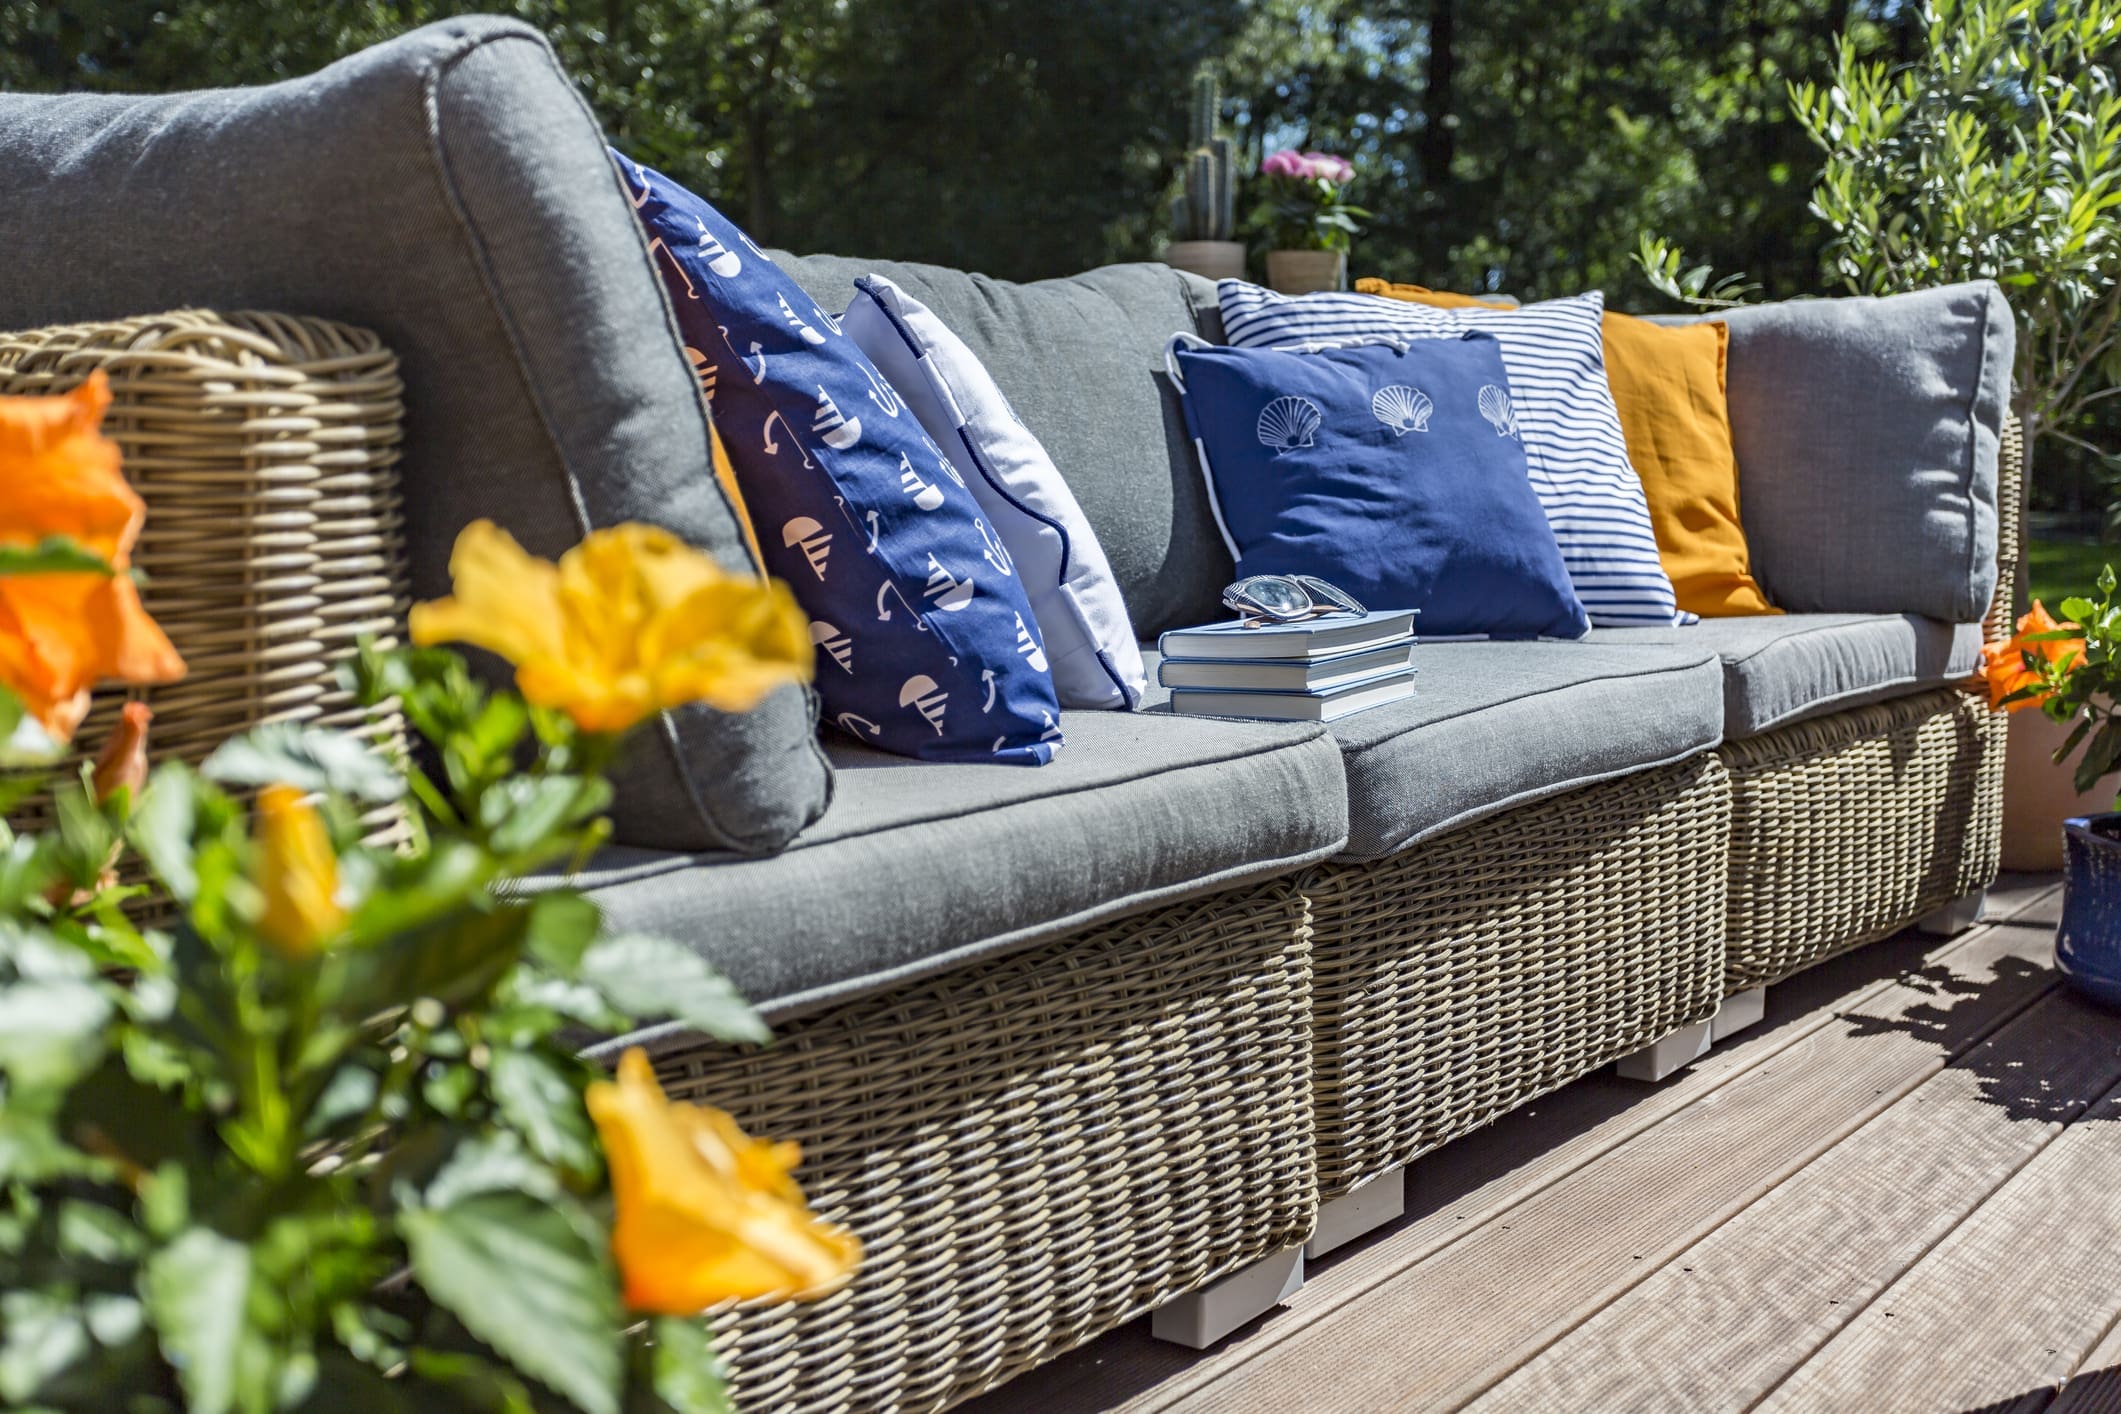 Sofa set placed in outdoors